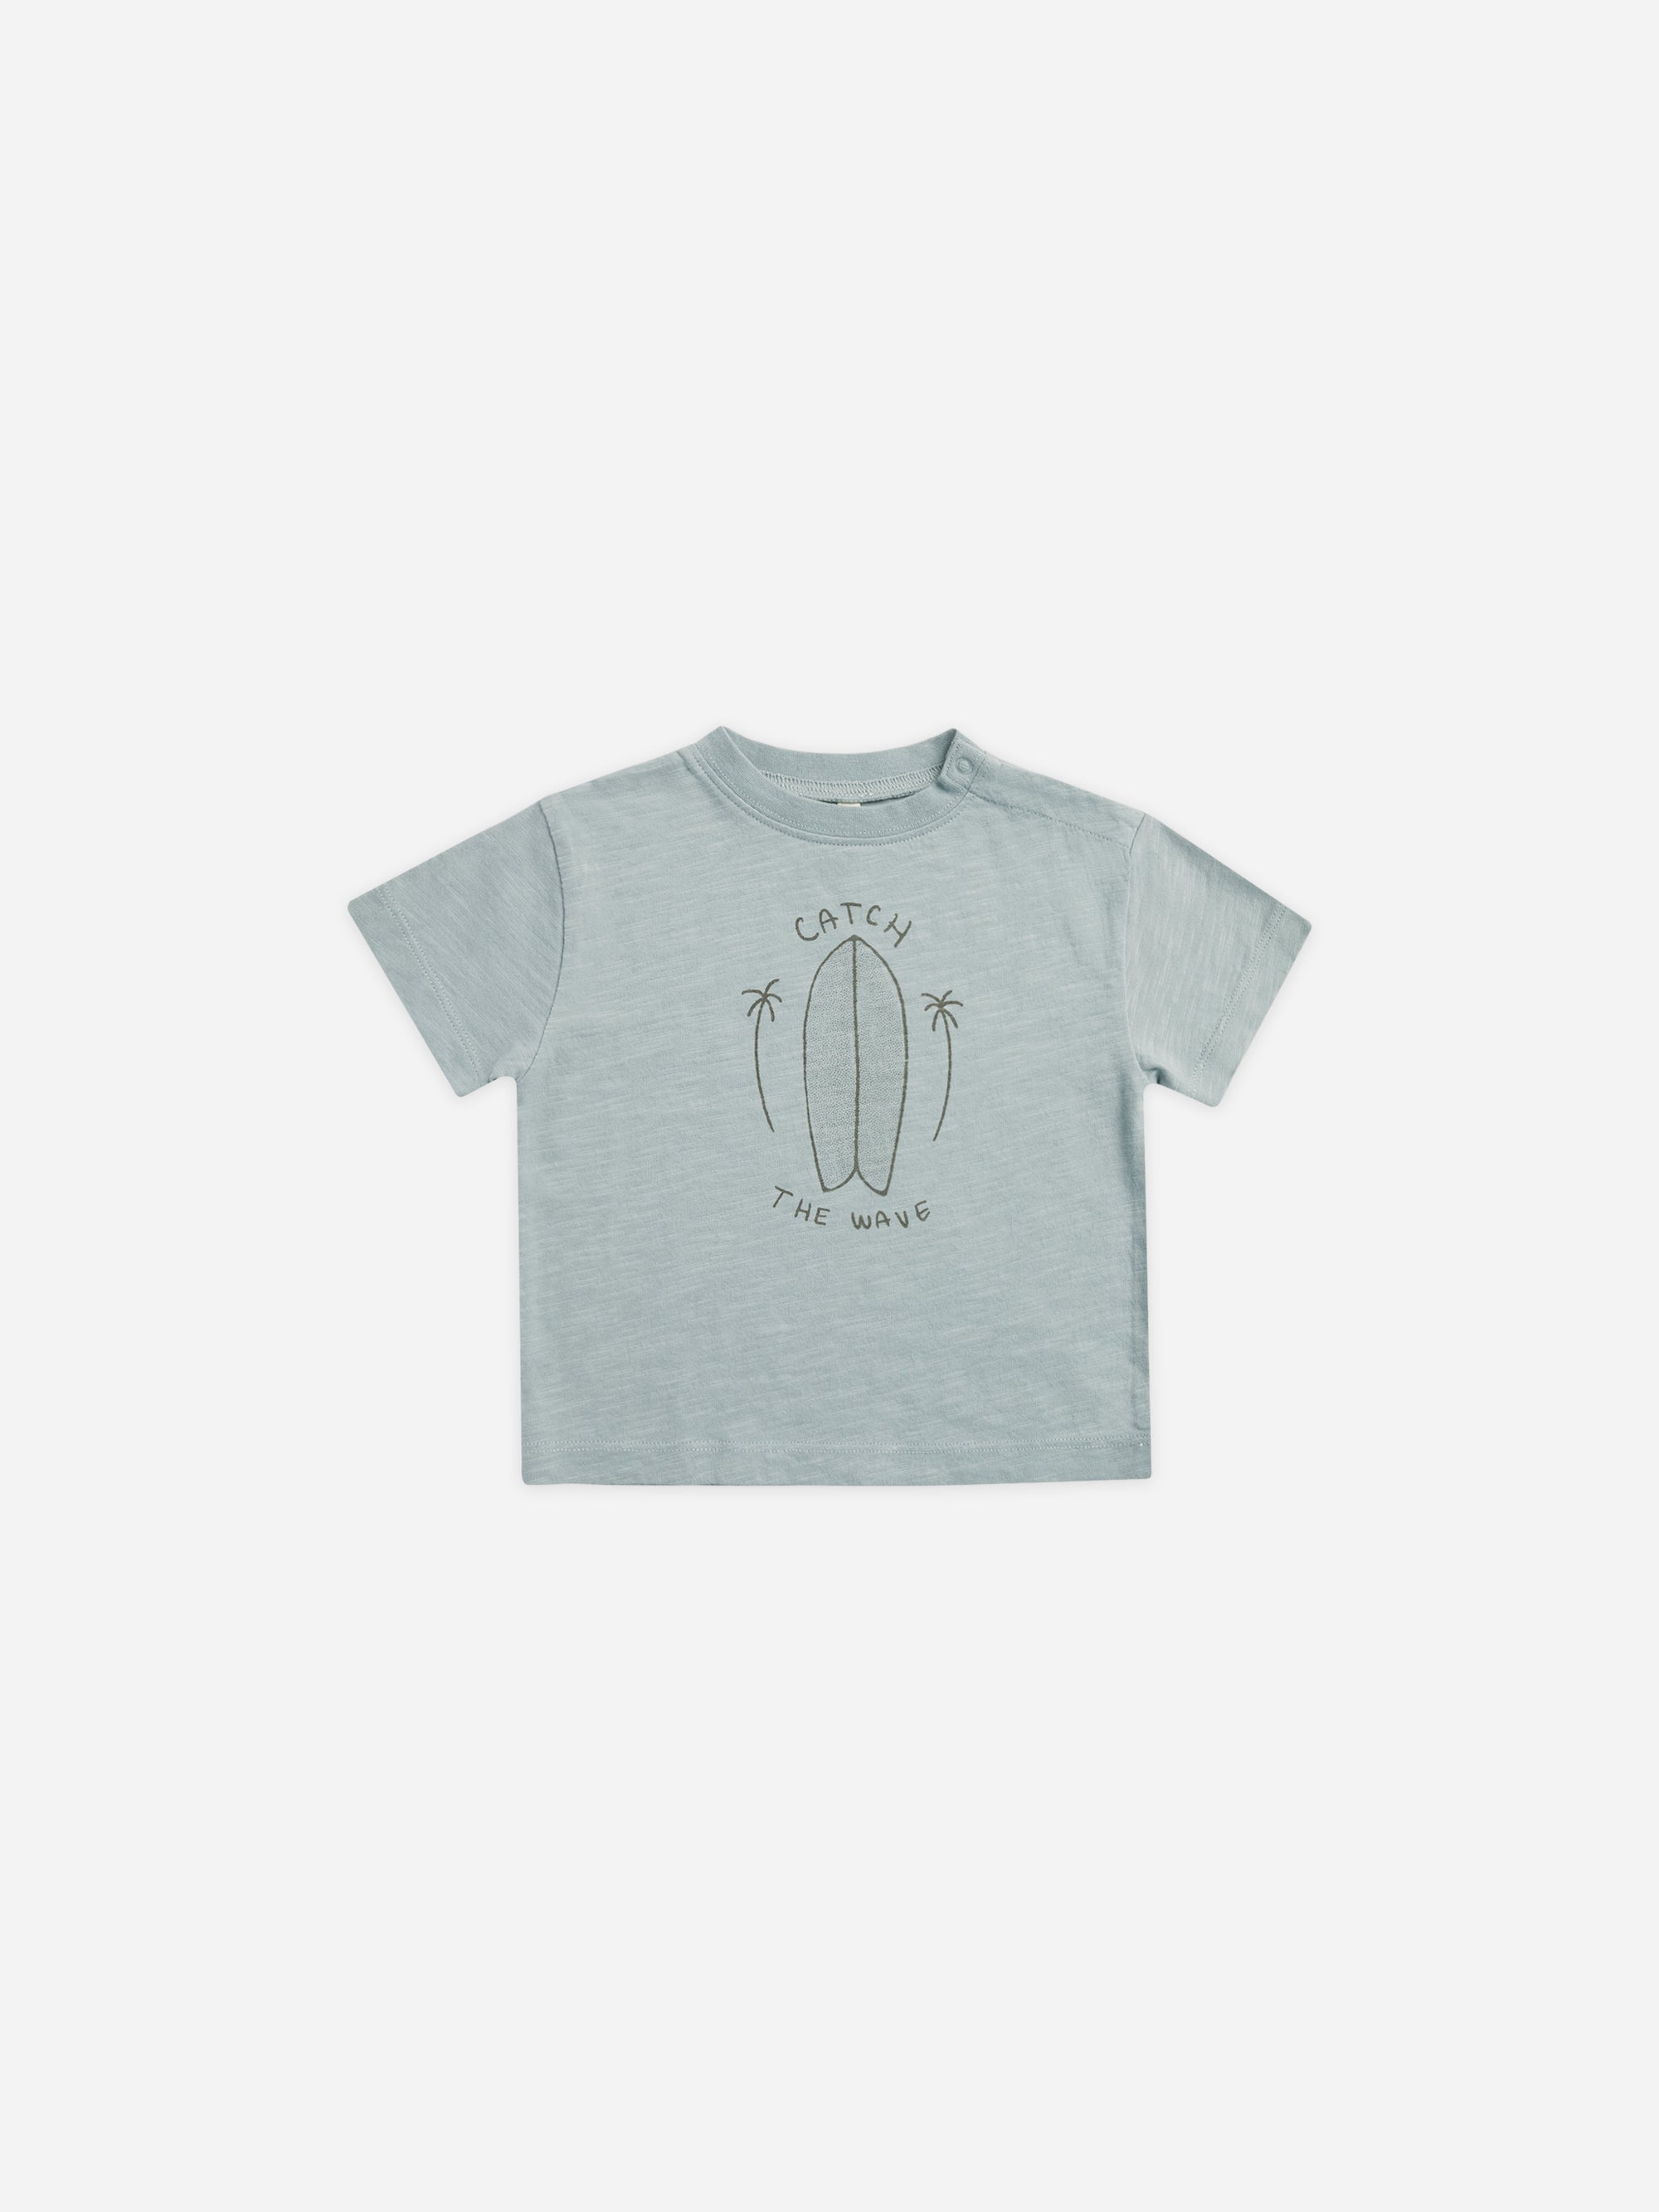 Relaxed Tee || Catch The Wave - Rylee + Cru | Kids Clothes | Trendy Baby Clothes | Modern Infant Outfits |